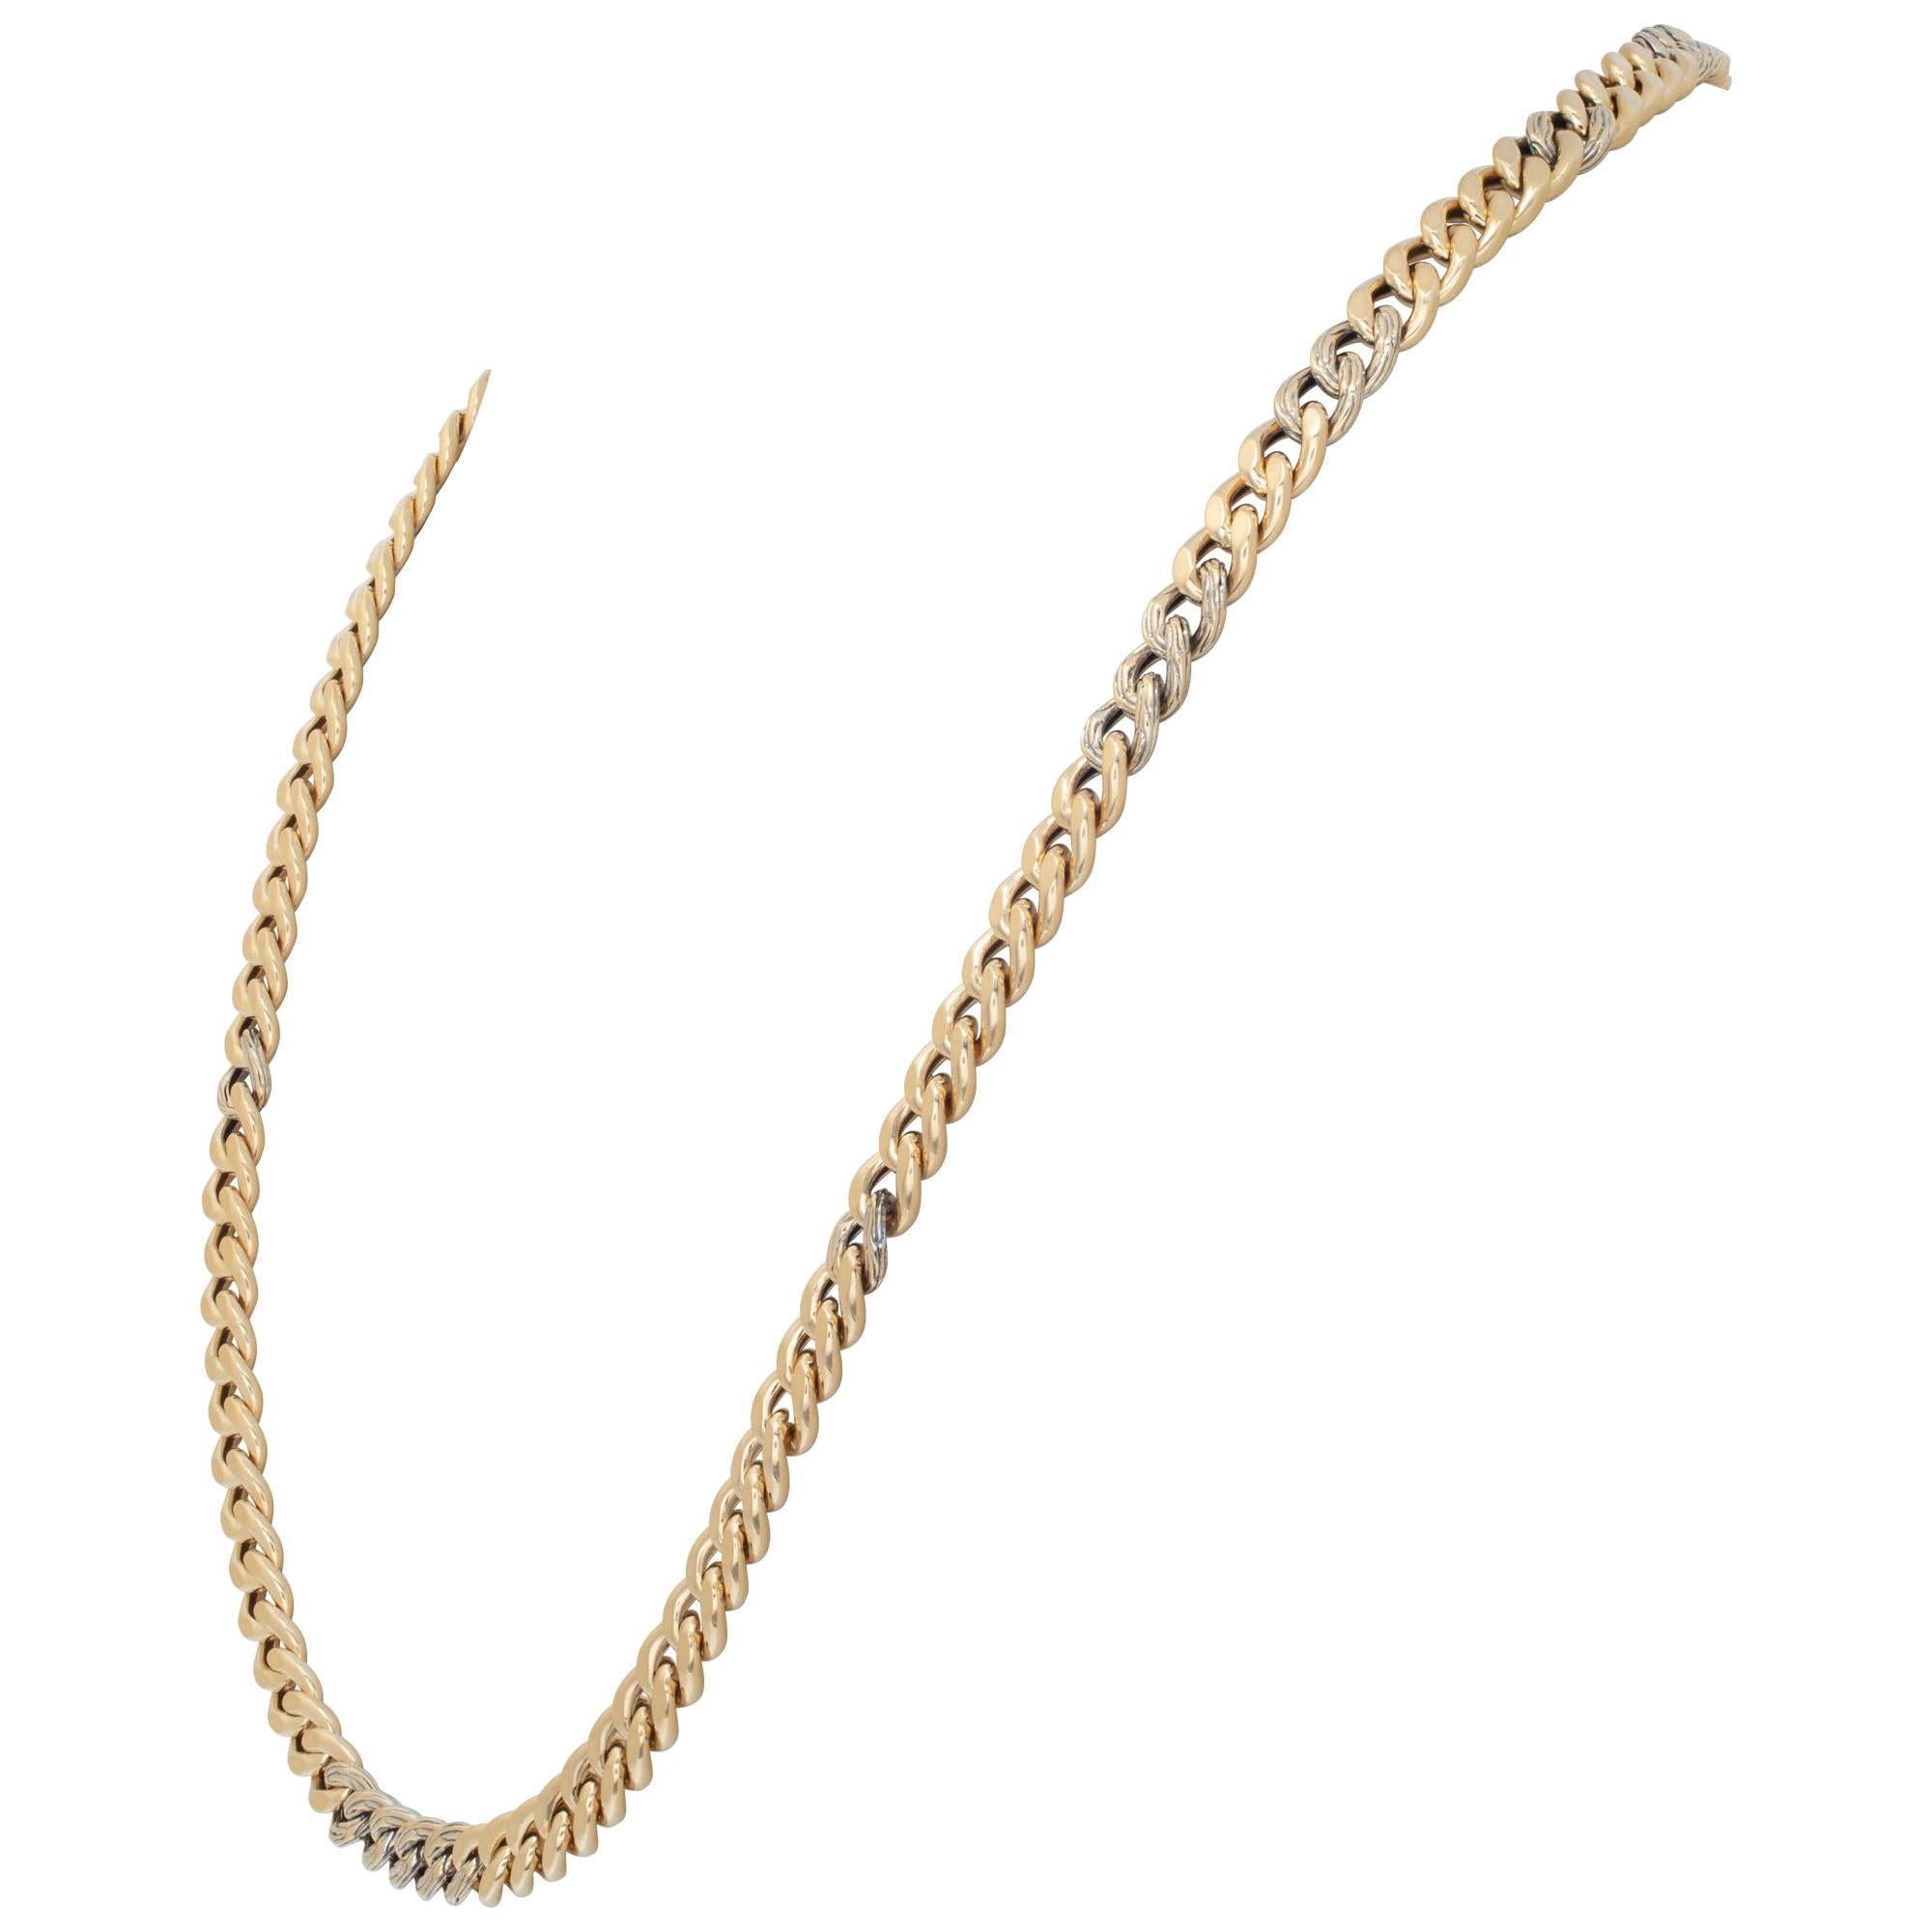 John Hardy cuban-link style chain necklace in 18k yellow gold with bark-finished links stations. Measures 26 inches, width 7mm.